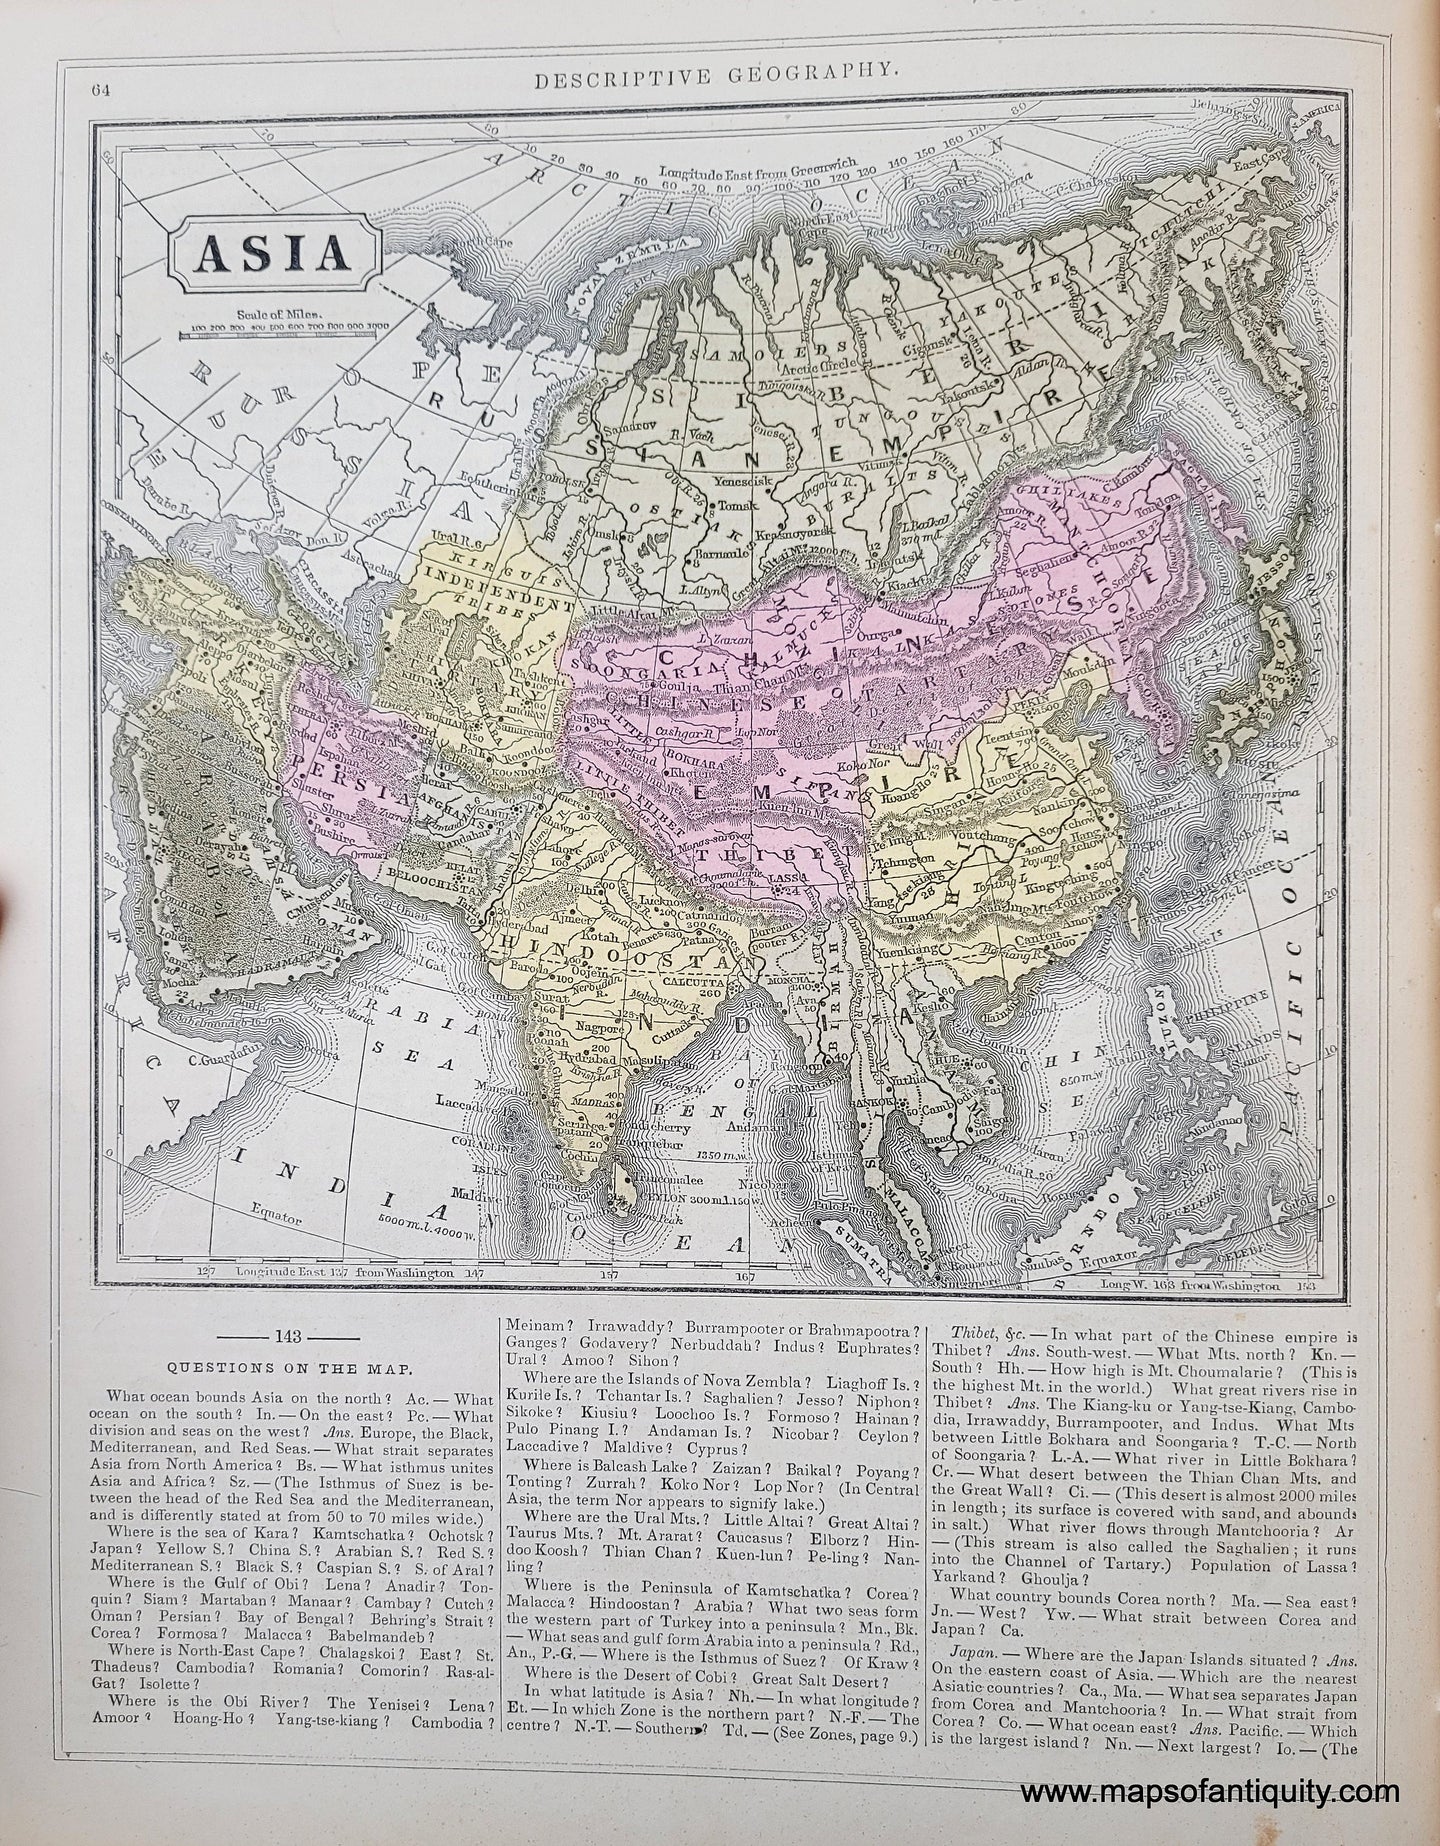 Genuine-Antique-Hand-Colored-Map-Asia-1850-Mitchell-Thomas-Cowperthwait-Co--Maps-Of-Antiquity